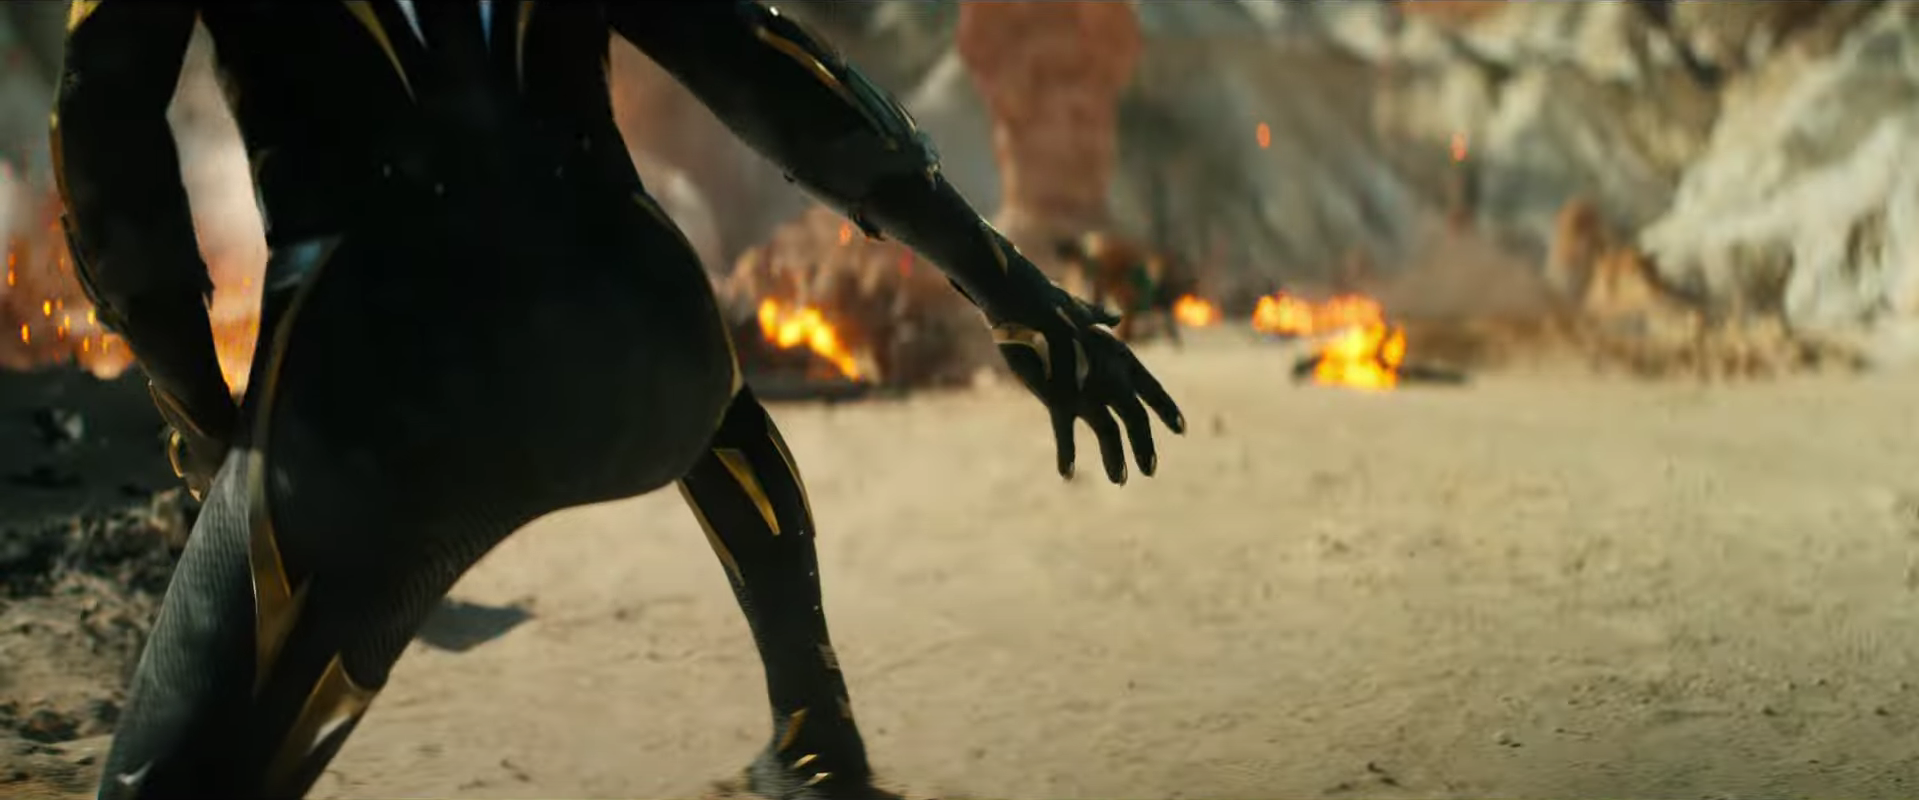 Why Avengers: Endgame Gave Black Panther and Wakandans Short